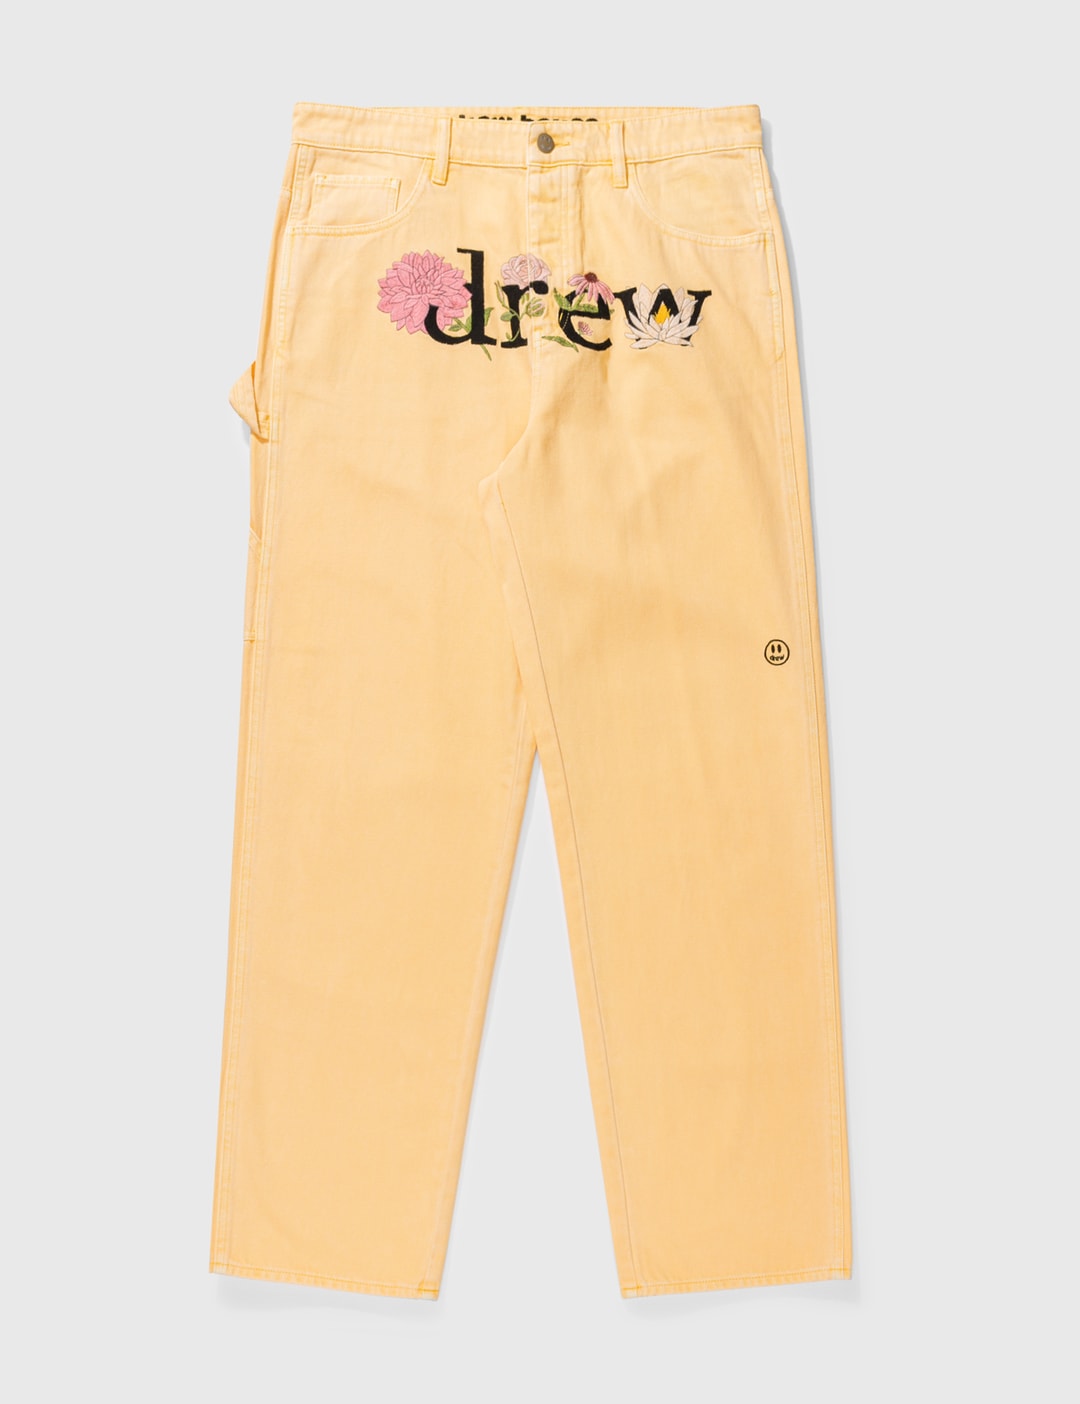 DREW HOUSE JEANS Placeholder Image